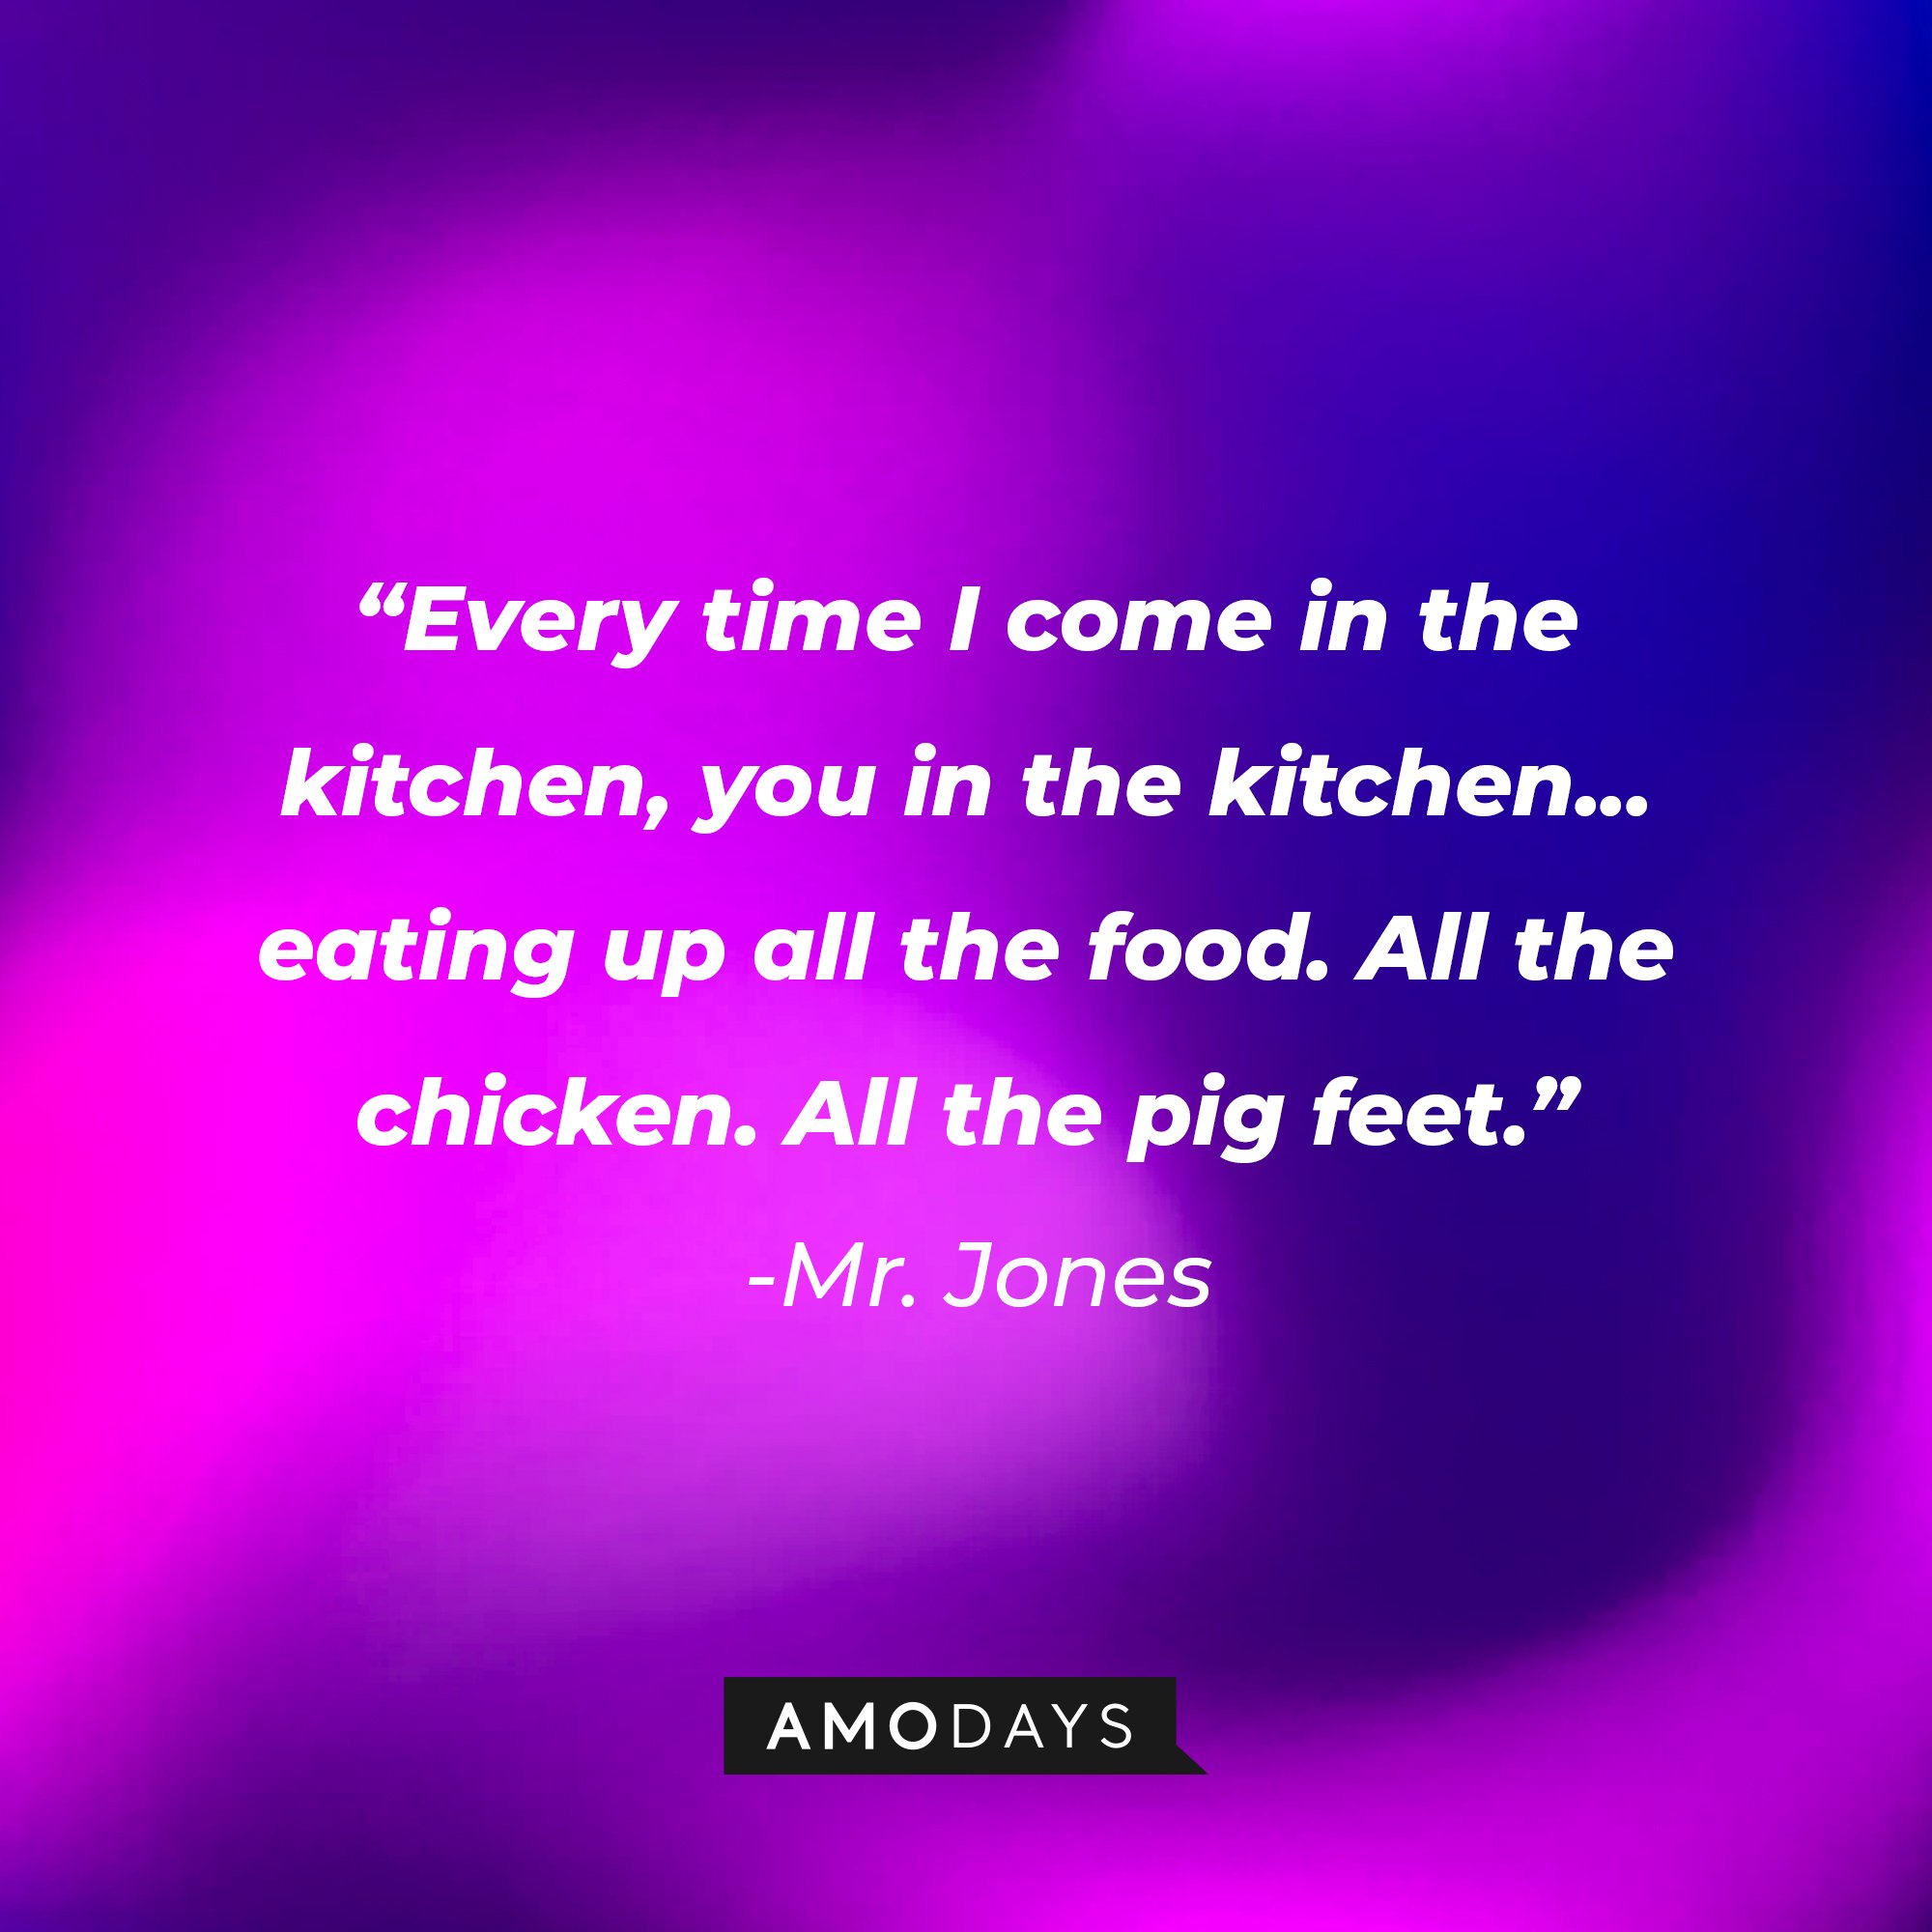 Mr. Jones’ quote: "Every time I come in the kitchen, you in the kitchen... eating up all the food. All the chicken. All the pig feet." | Image: AmoDays